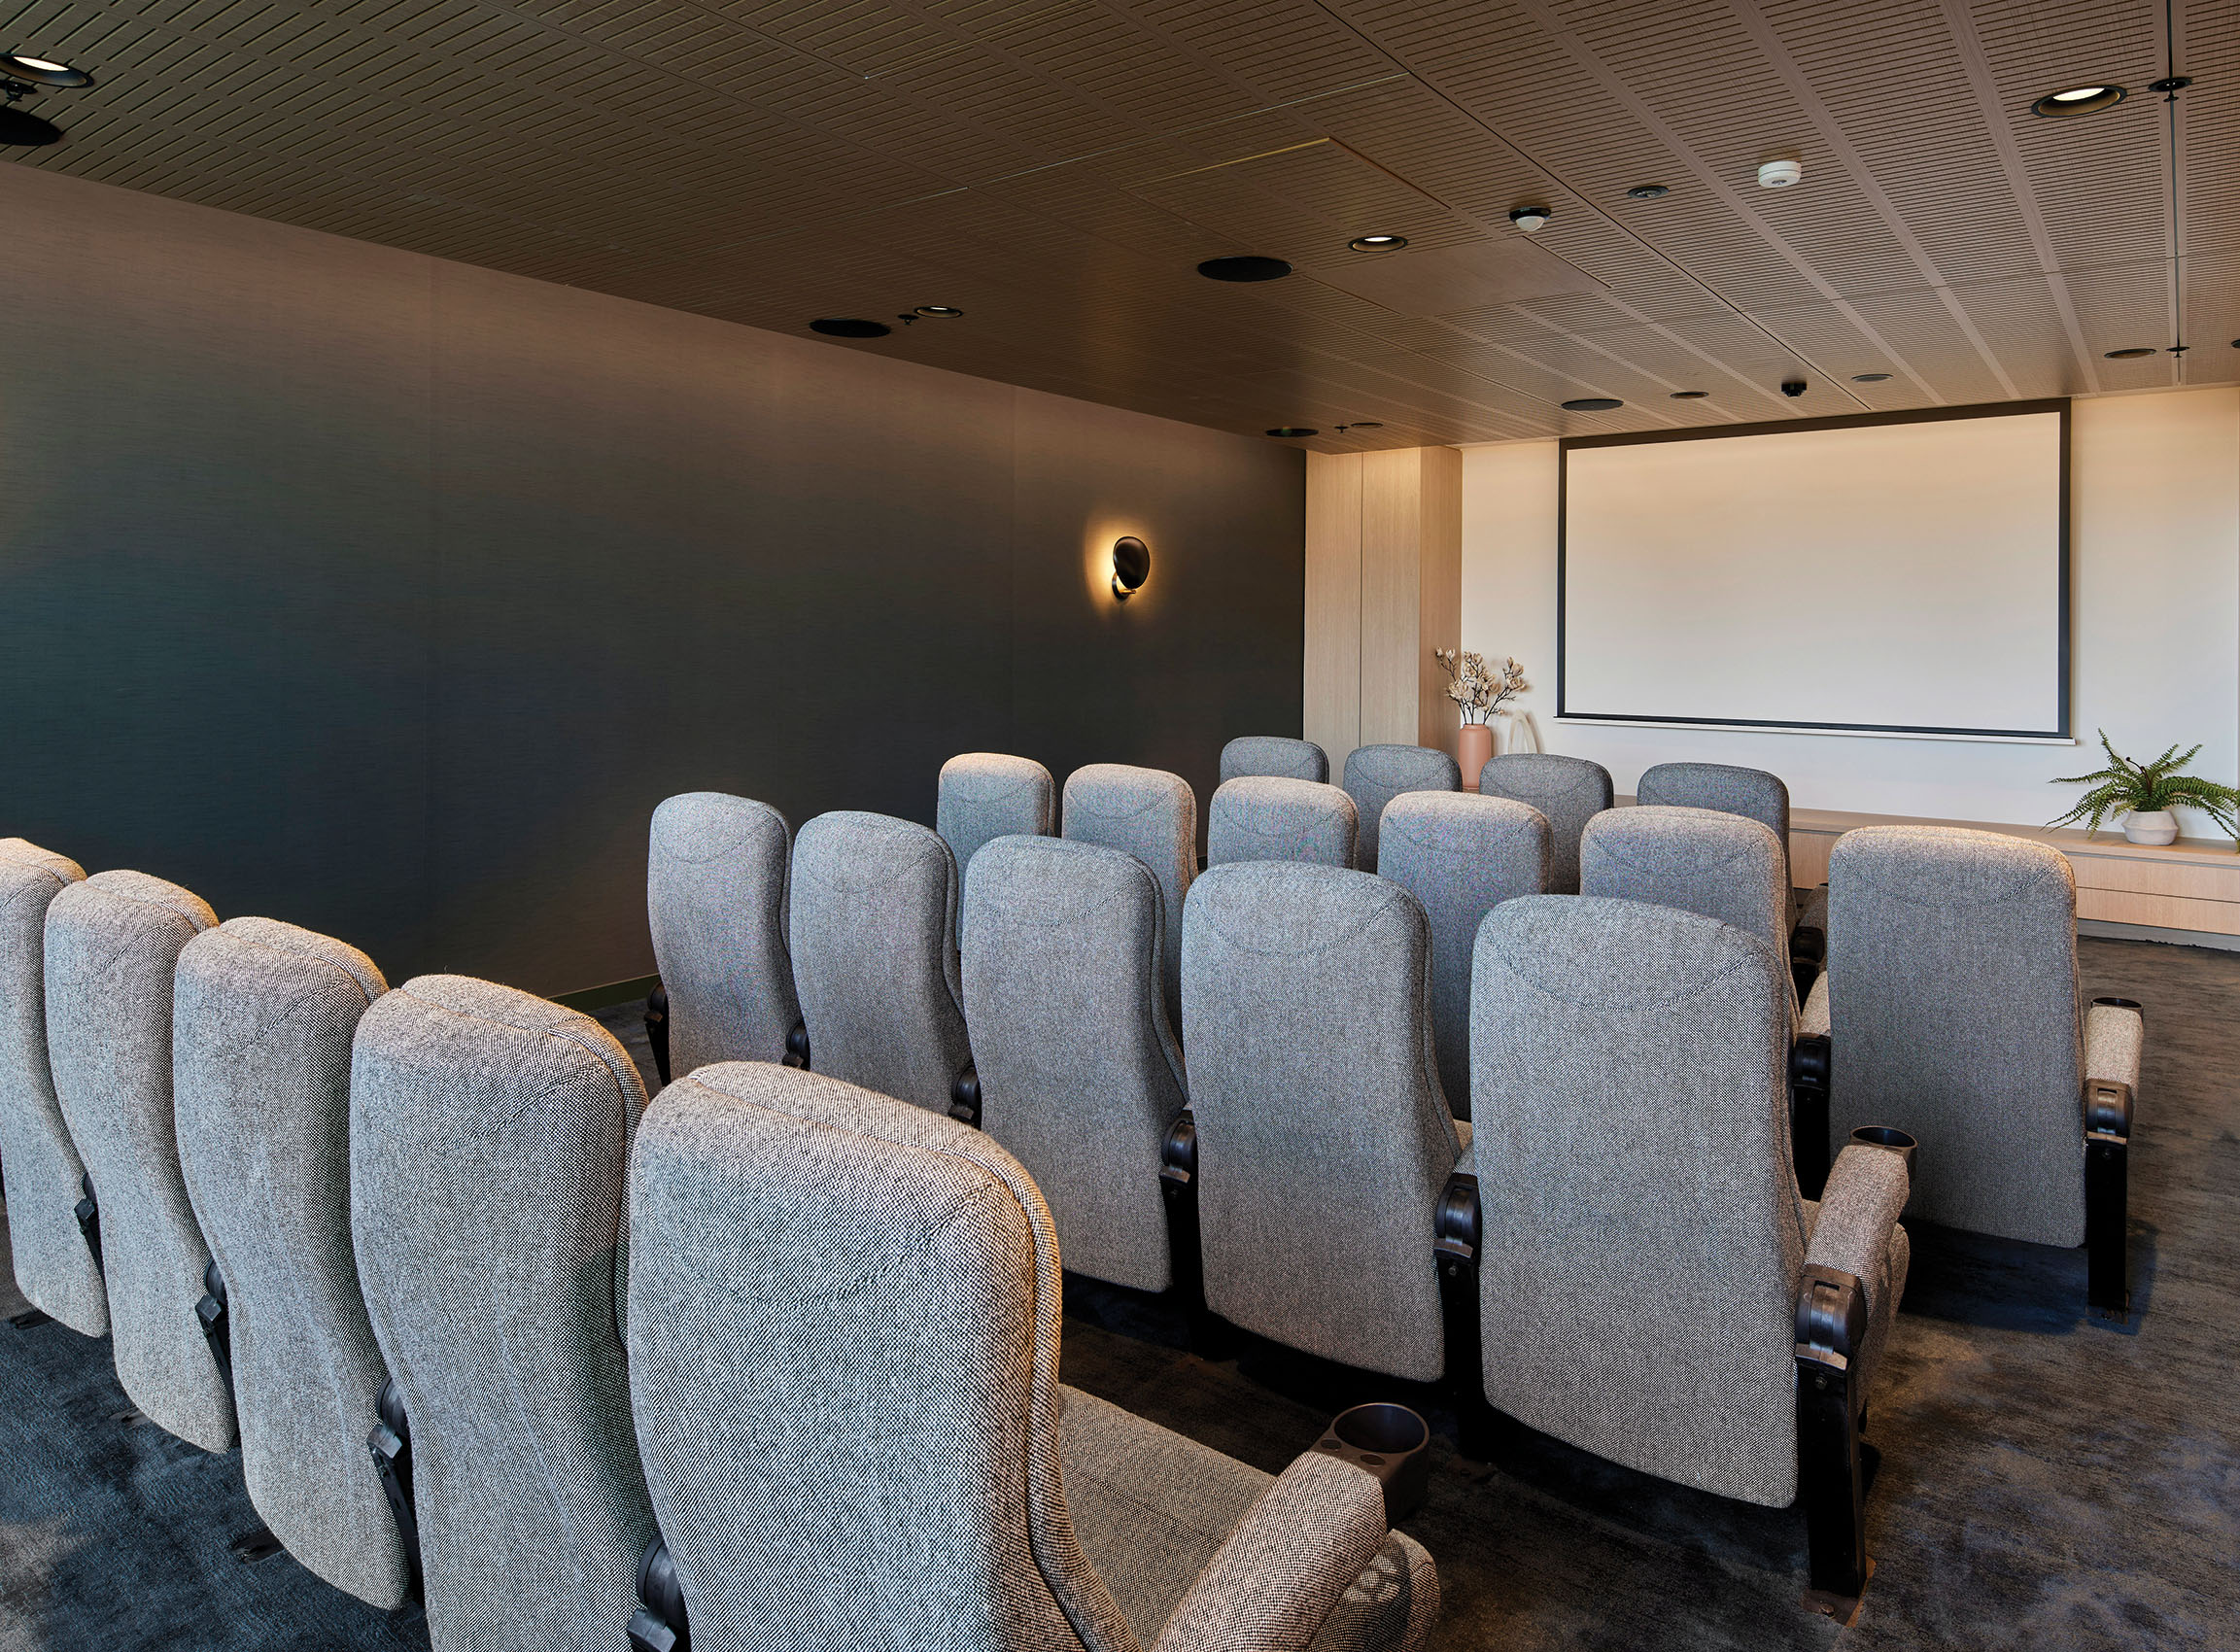 Take a seat for screenings of your favourite shows and movies in the cinema.